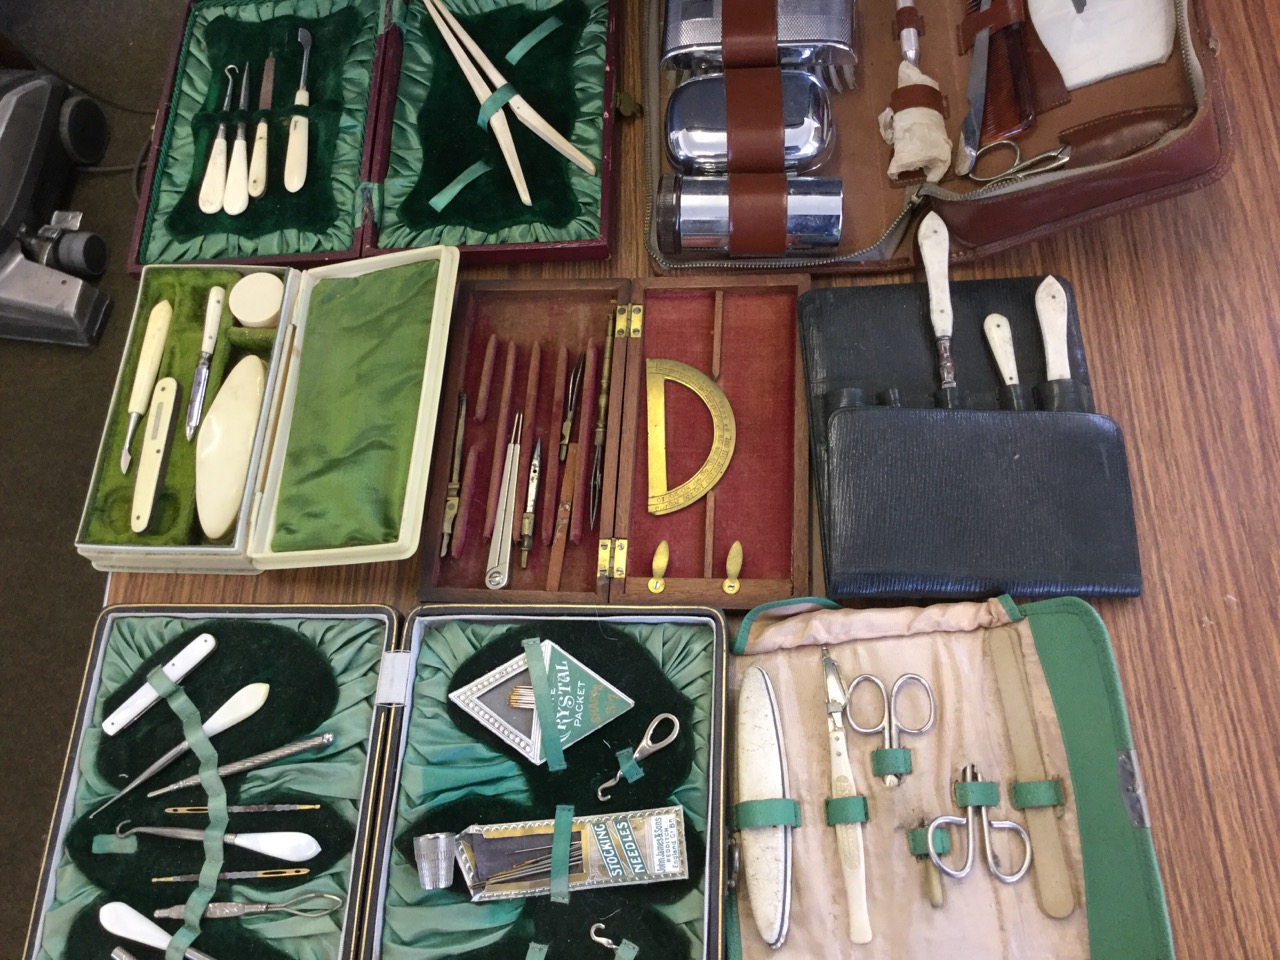 Seven cased sets of implements - sewing, manicure, geometry drawing, gents, etc., mainly incomplete. - Image 2 of 3